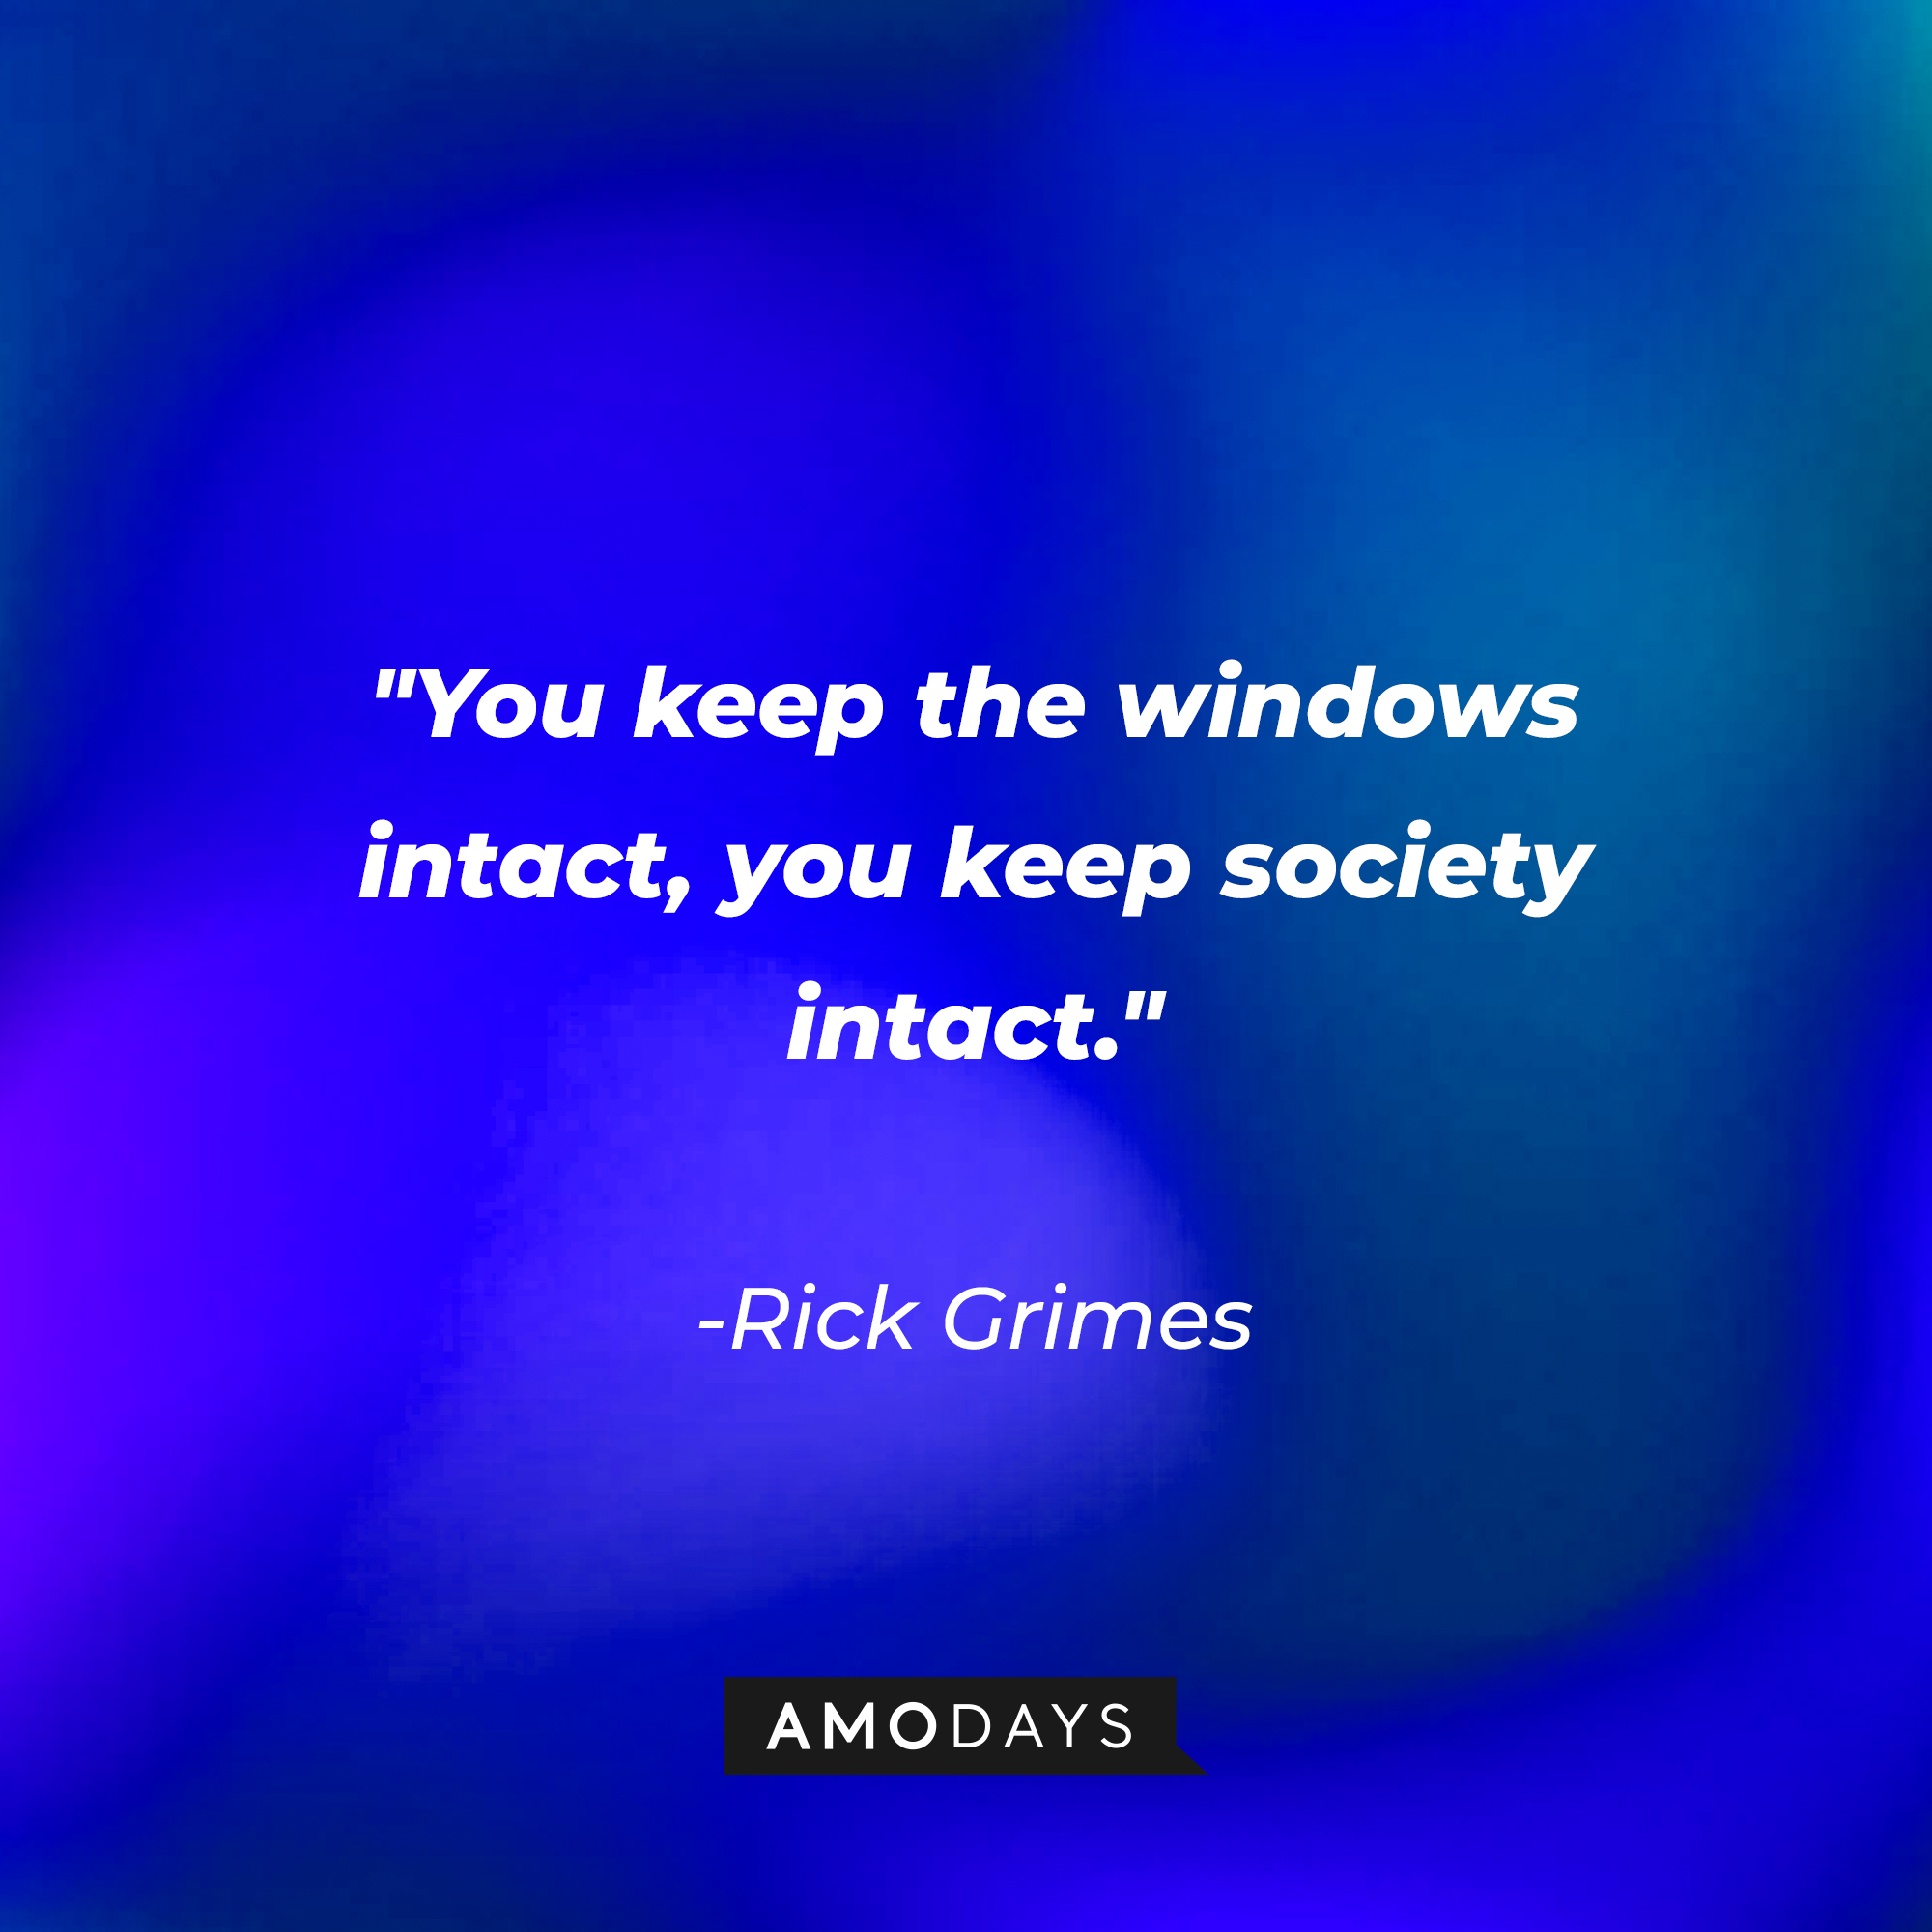 Rick Grimes' quote: "You keep the windows intact, you keep society intact." | Source: AmoDays